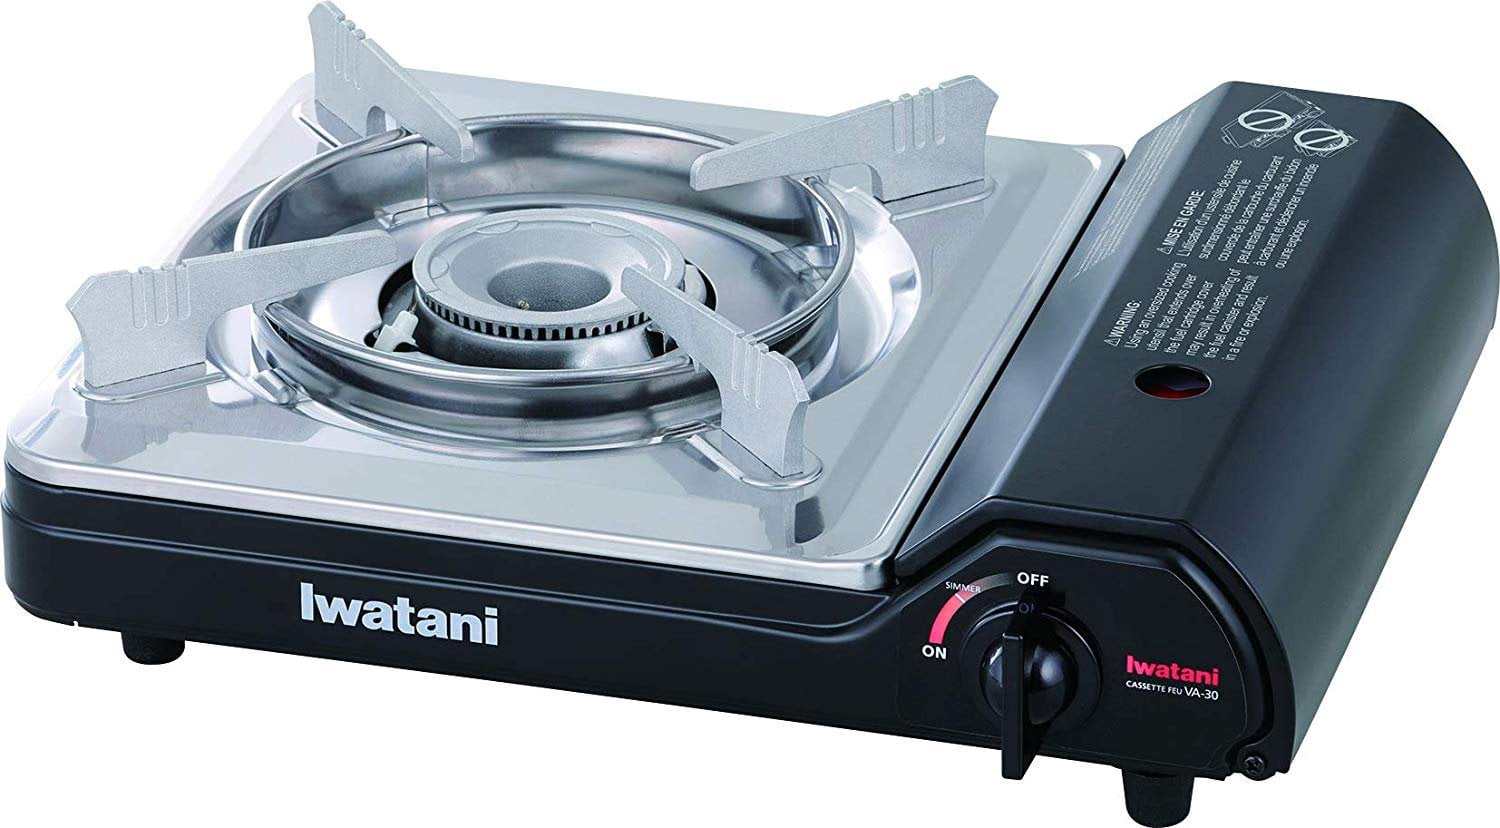 Are cassette butane stoves safe to use indoors? I have an Iwatani that I  love for making KBBQ in the backyard but the stove came with warnings not  to use inside. I